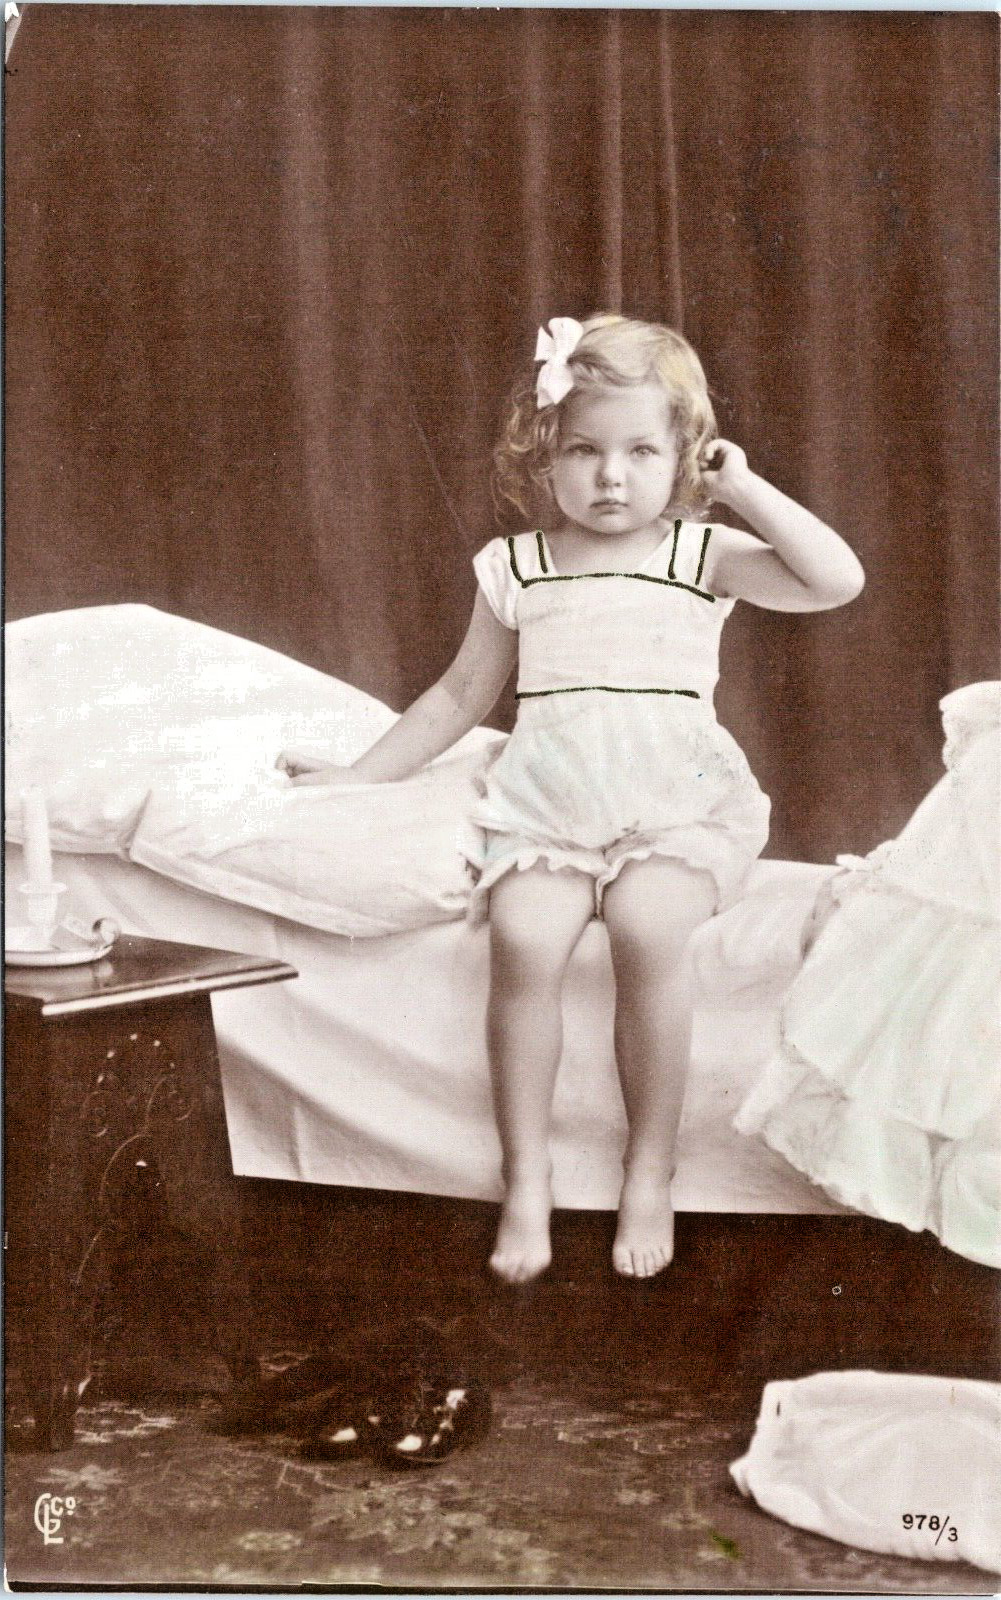 RPPC Young Girl Blond Curls Bow Bedtime Nightie White Lace  Studio P.UN. N-315